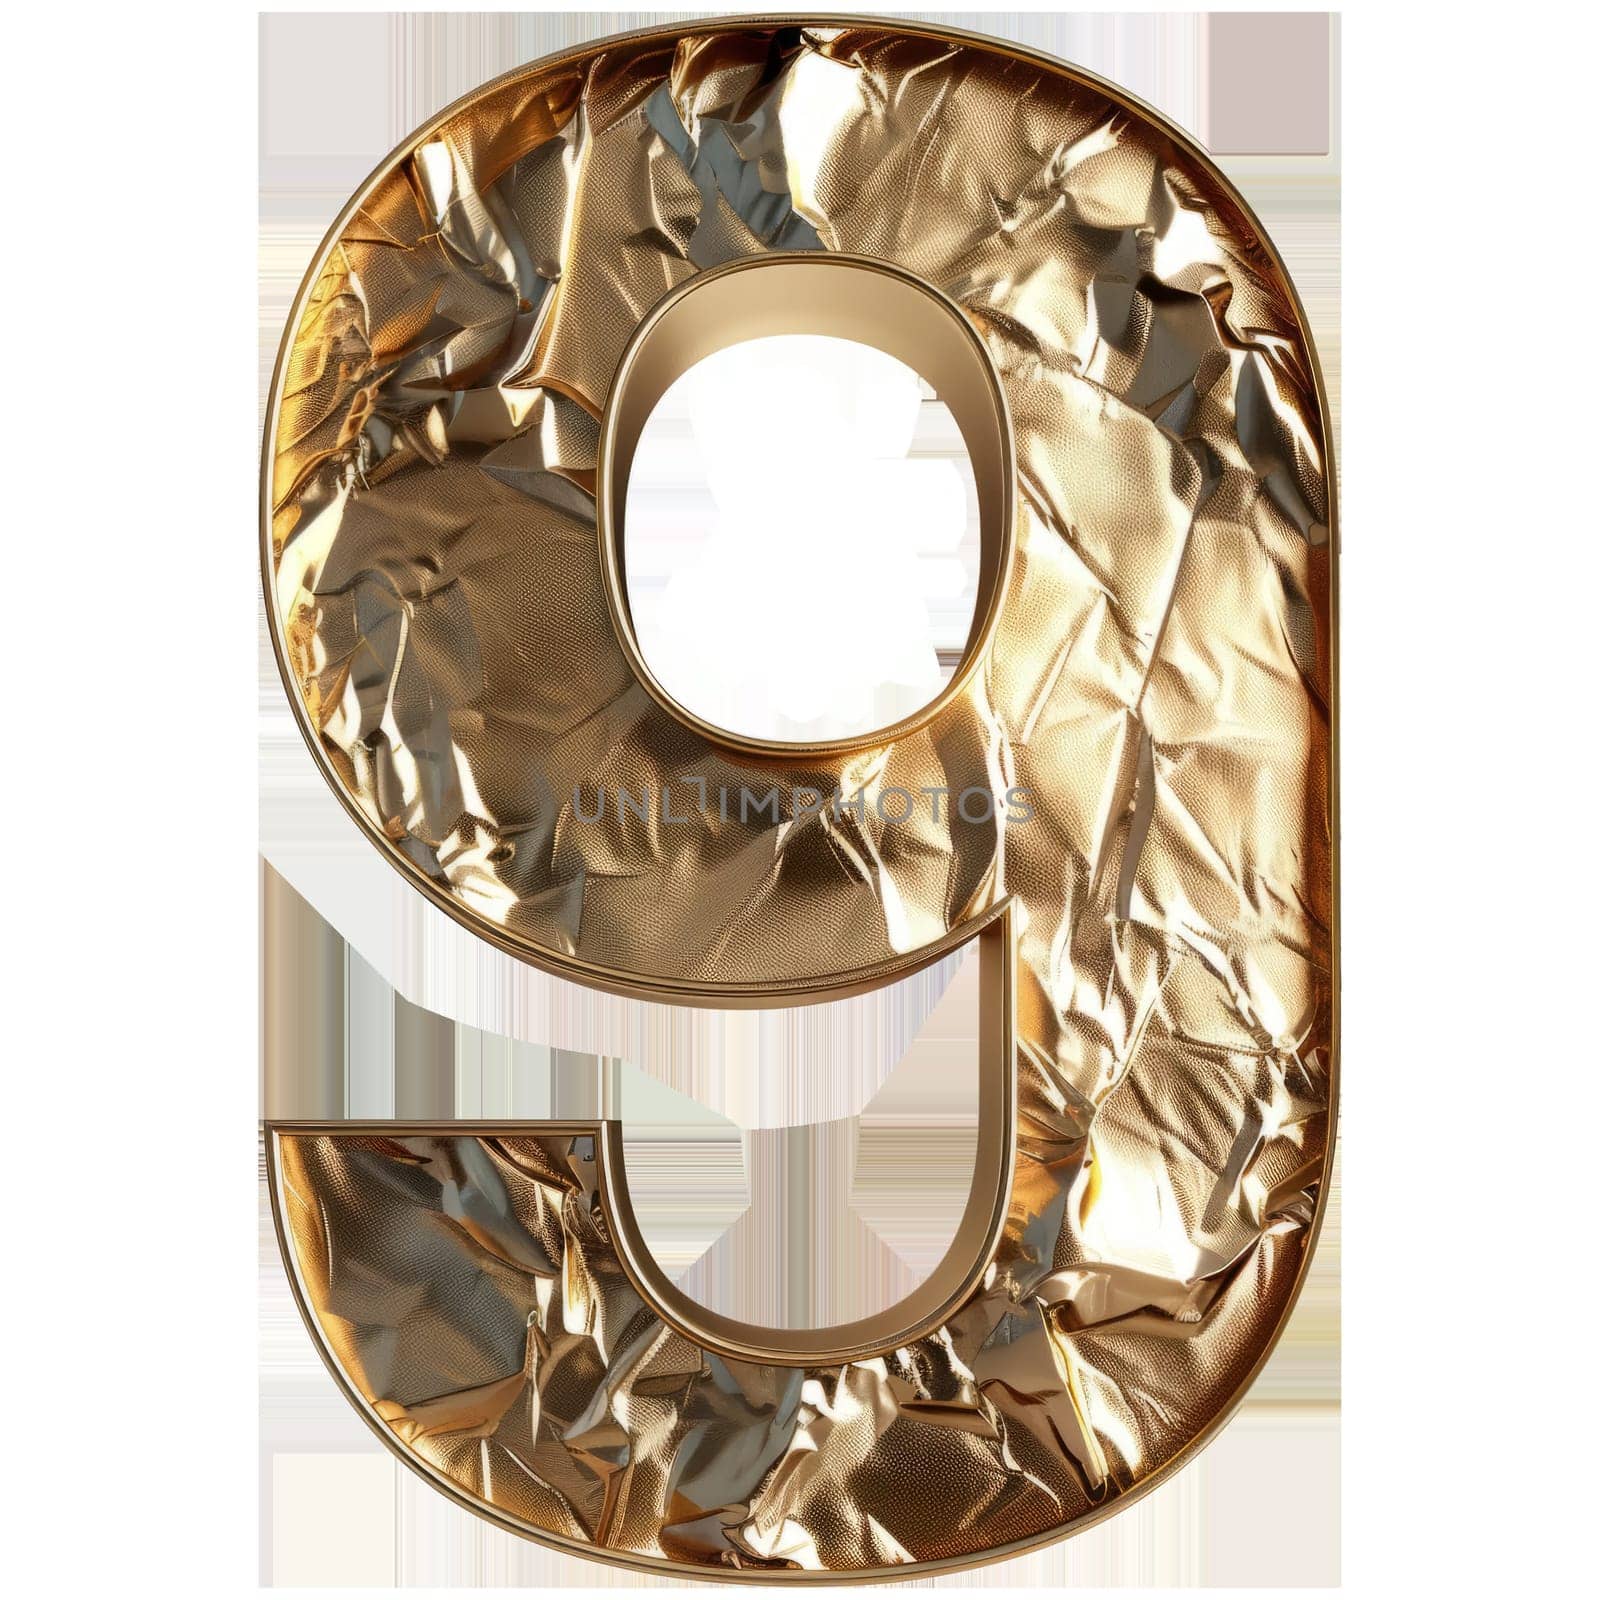 Golden Number 9 Png Isolated on White Background. Golden Foil Font Element. by iliris